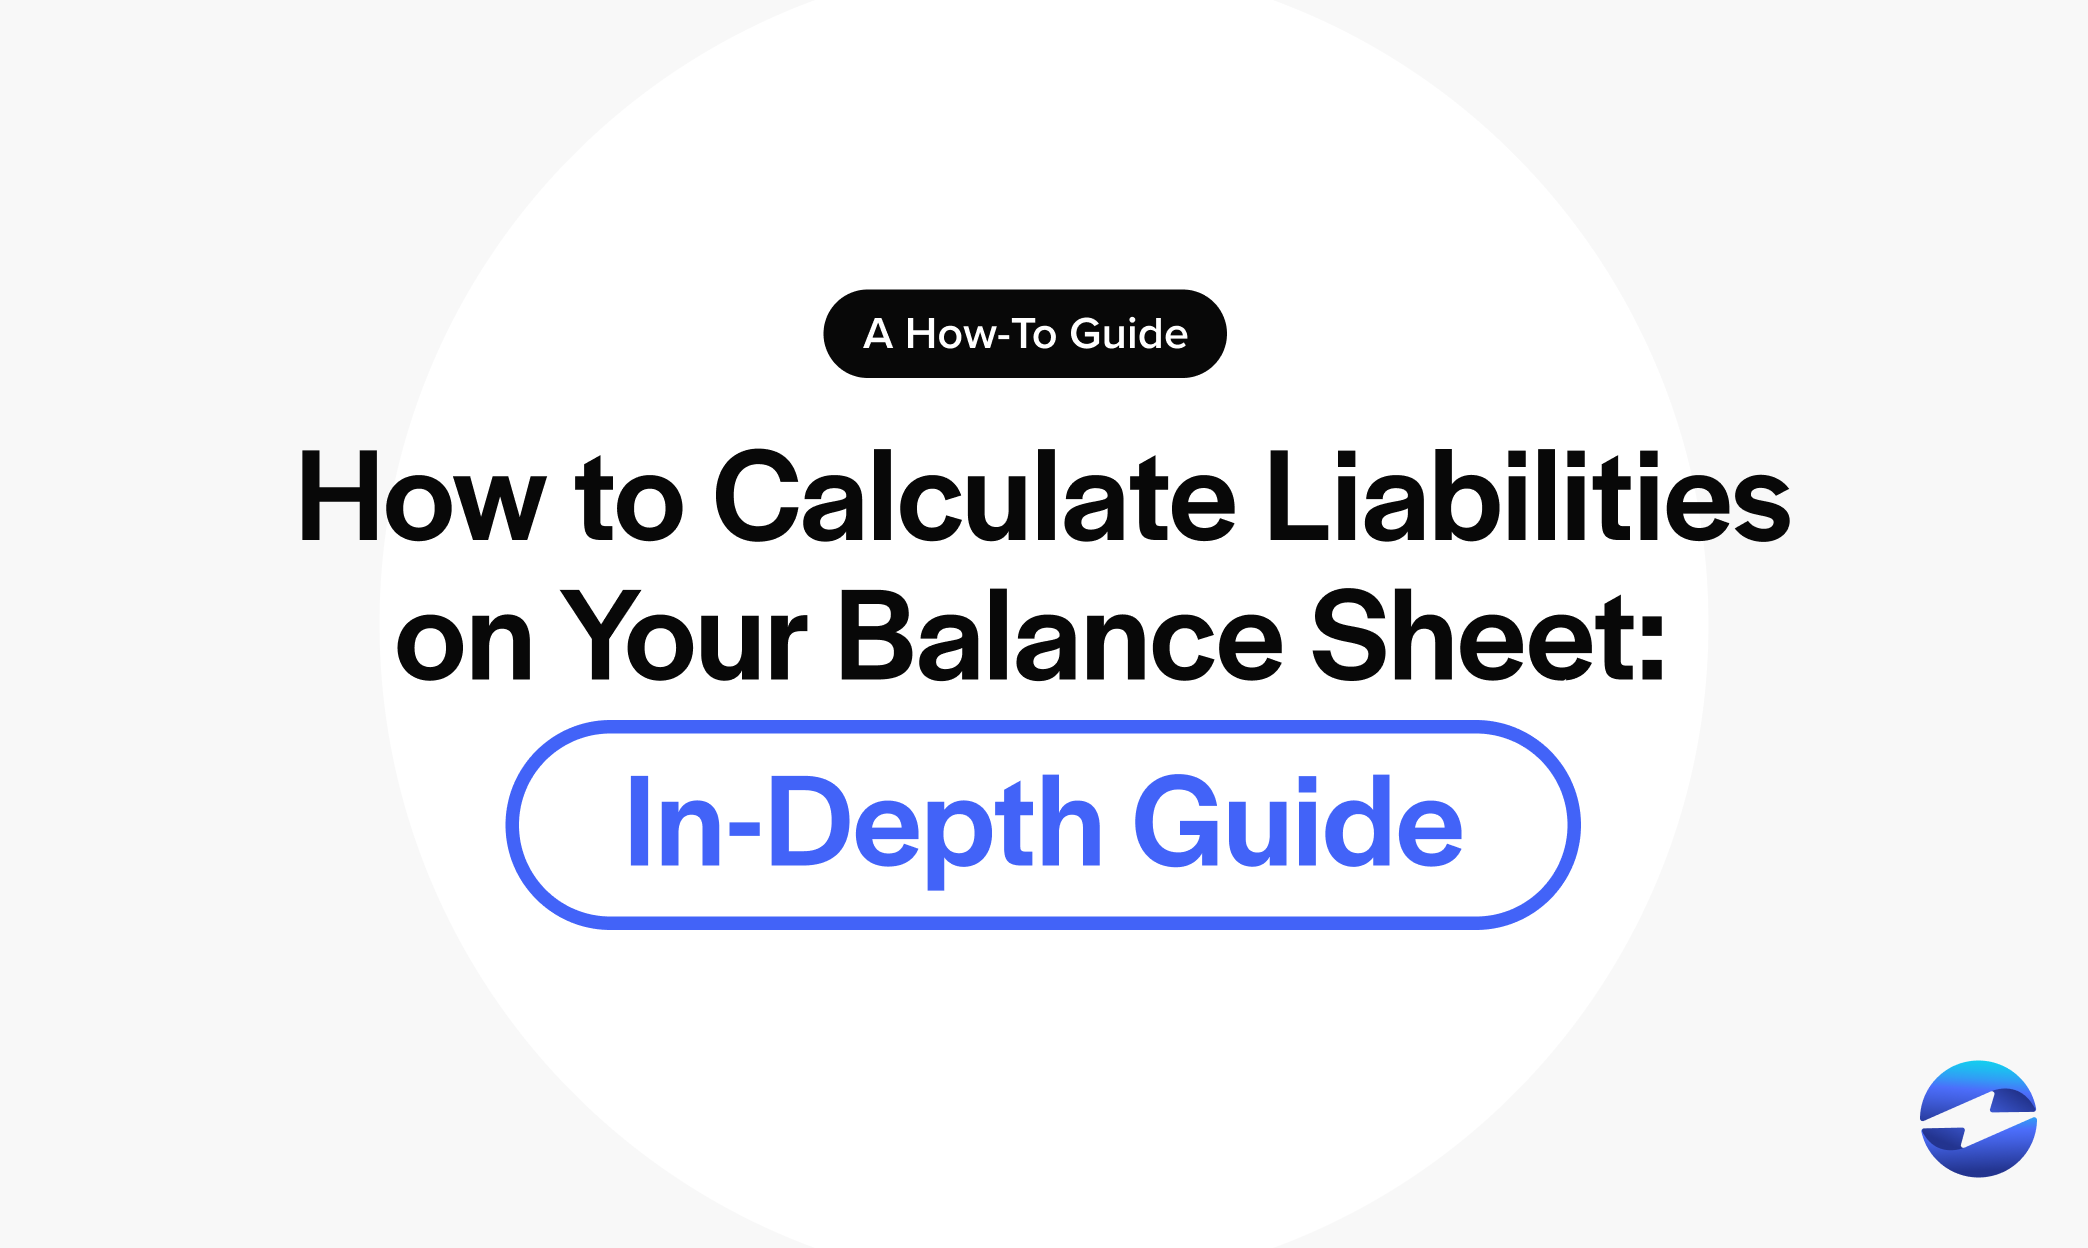 How to Calculate Liabilities on Your Balance Sheet: In-Depth Guide